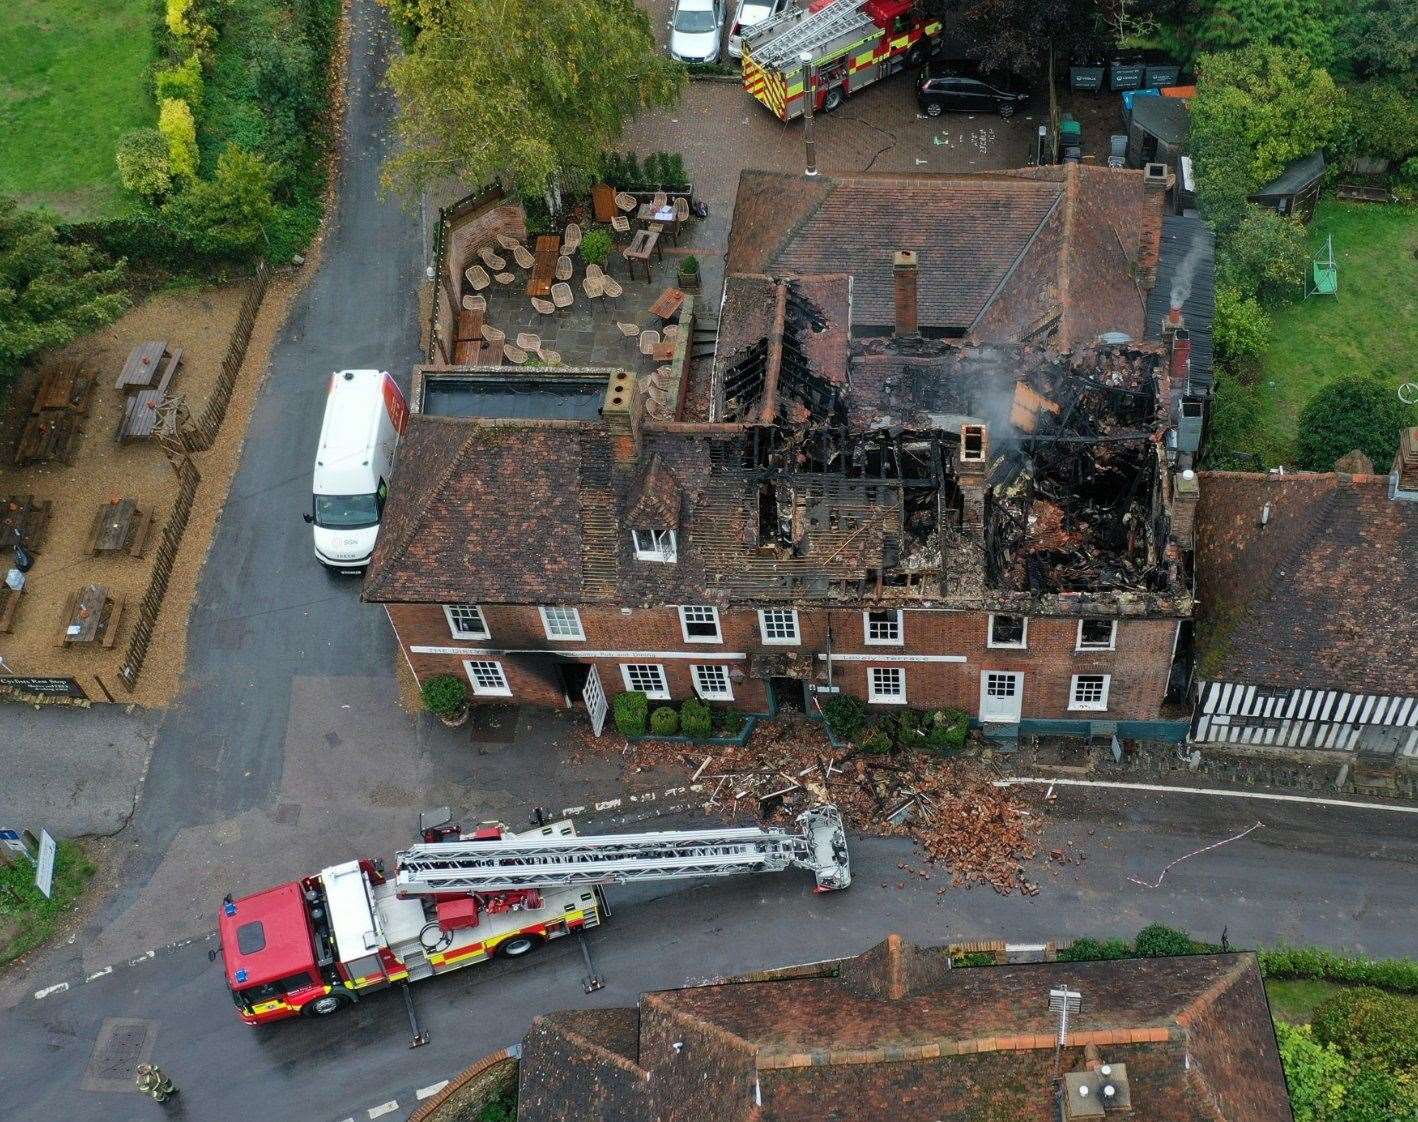 Drone pictures show the extent of the devastation. Picture: UKNIP